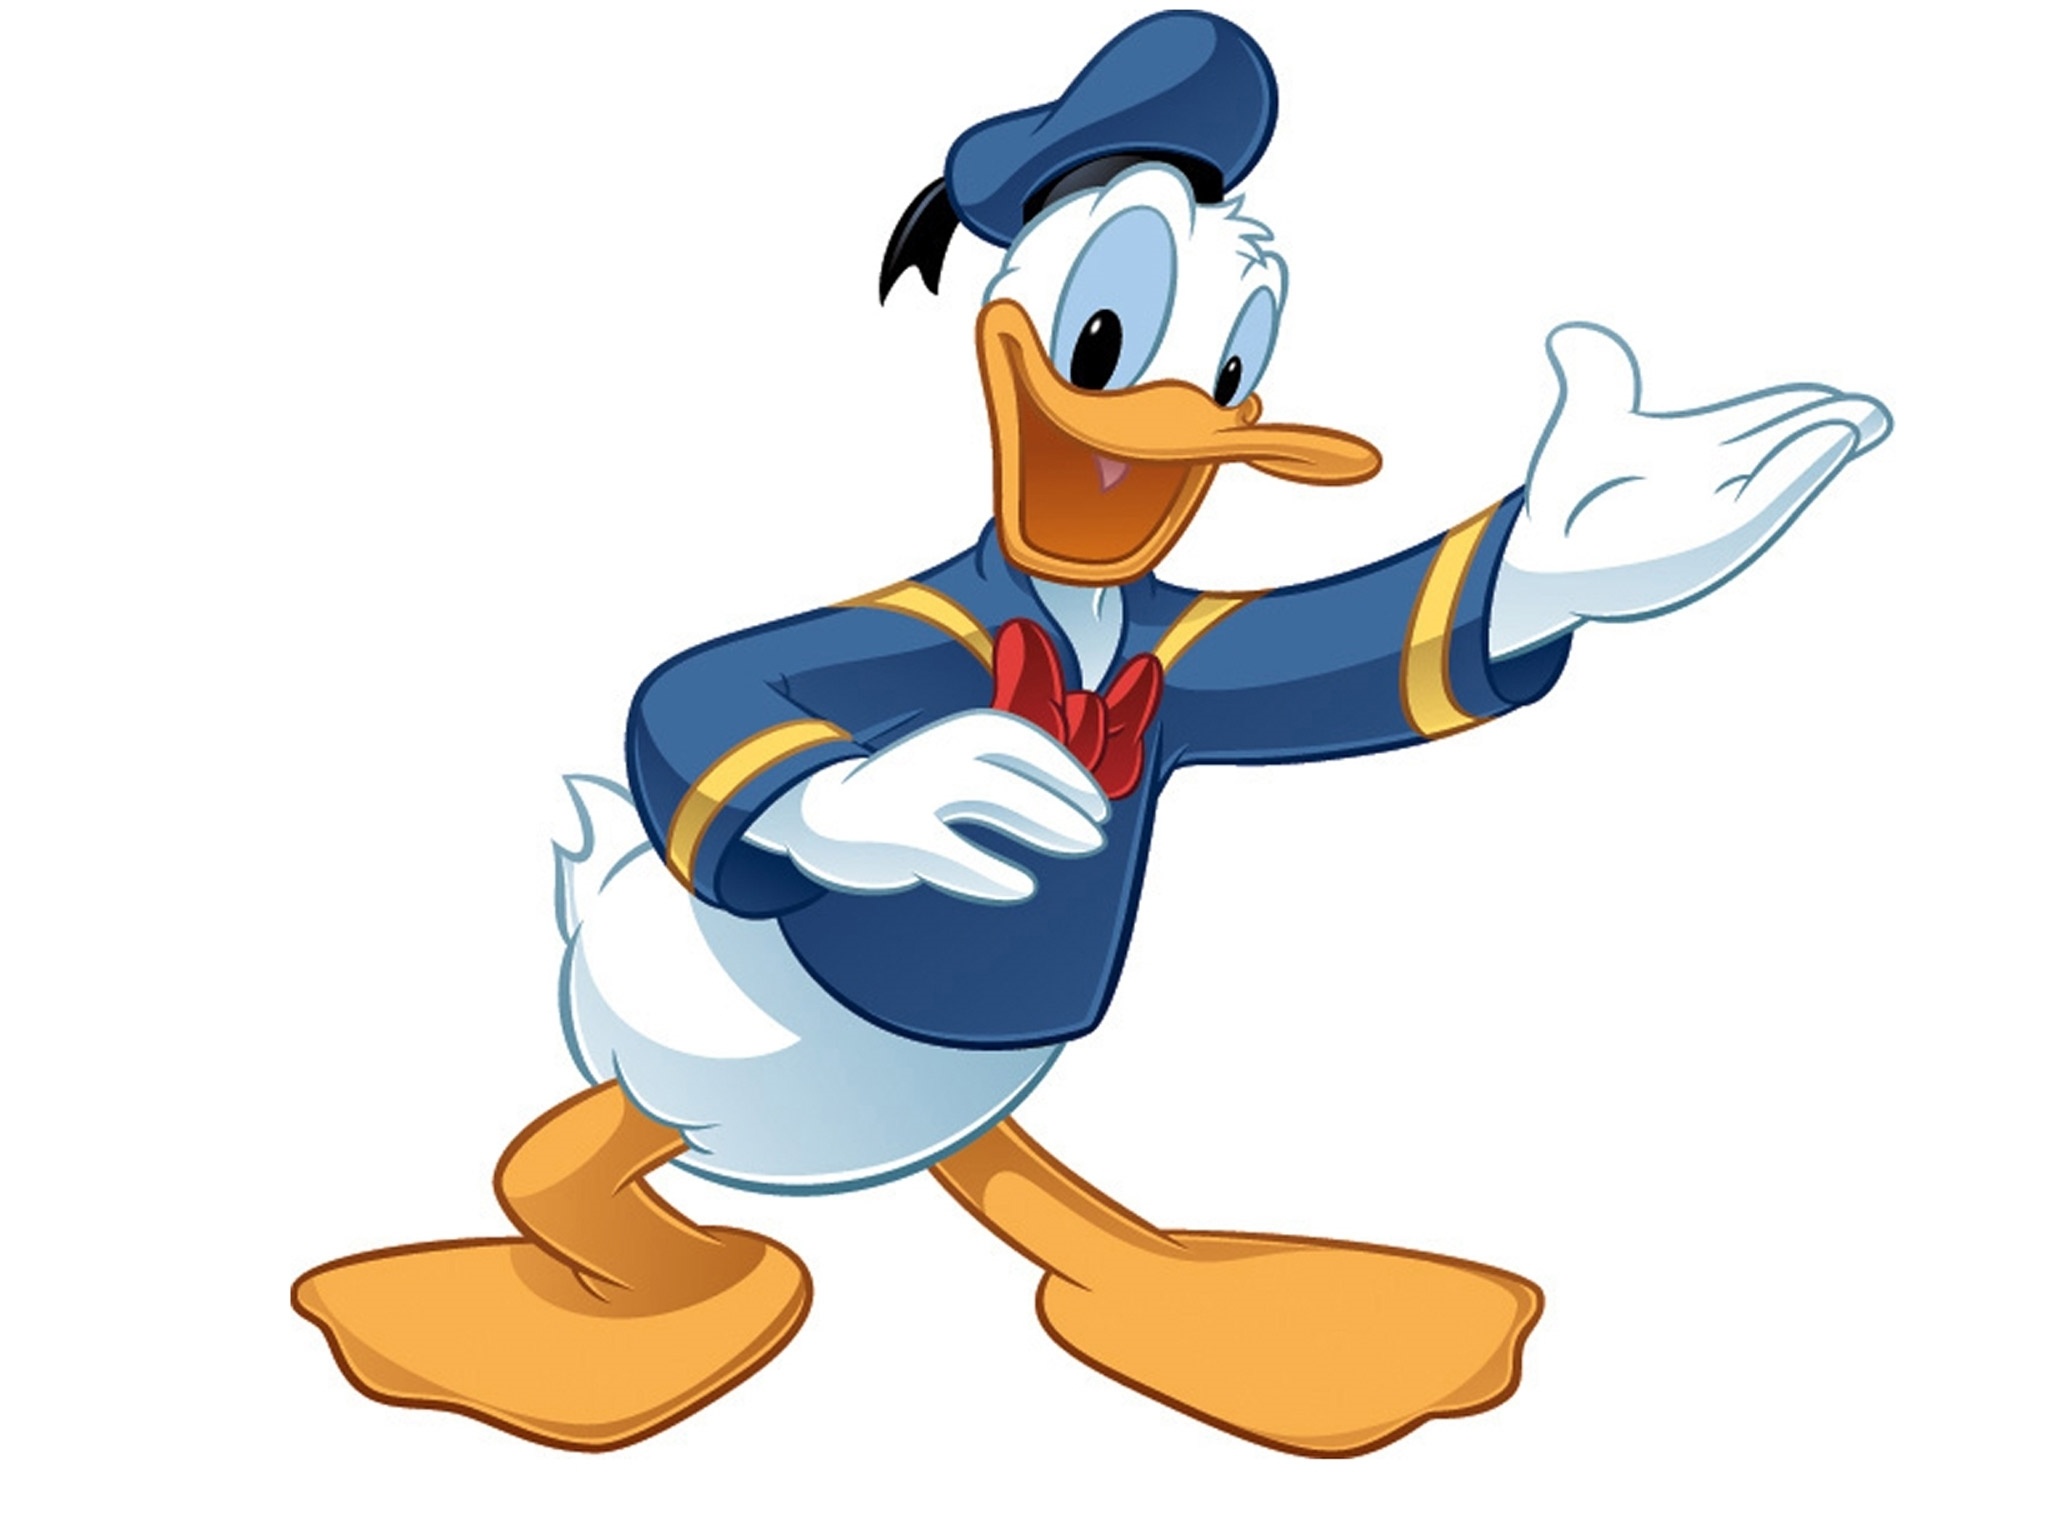 Donald Duck: Donald's first theatrical appearance, The Wise Little Hen, 1934. 2050x1540 HD Wallpaper.